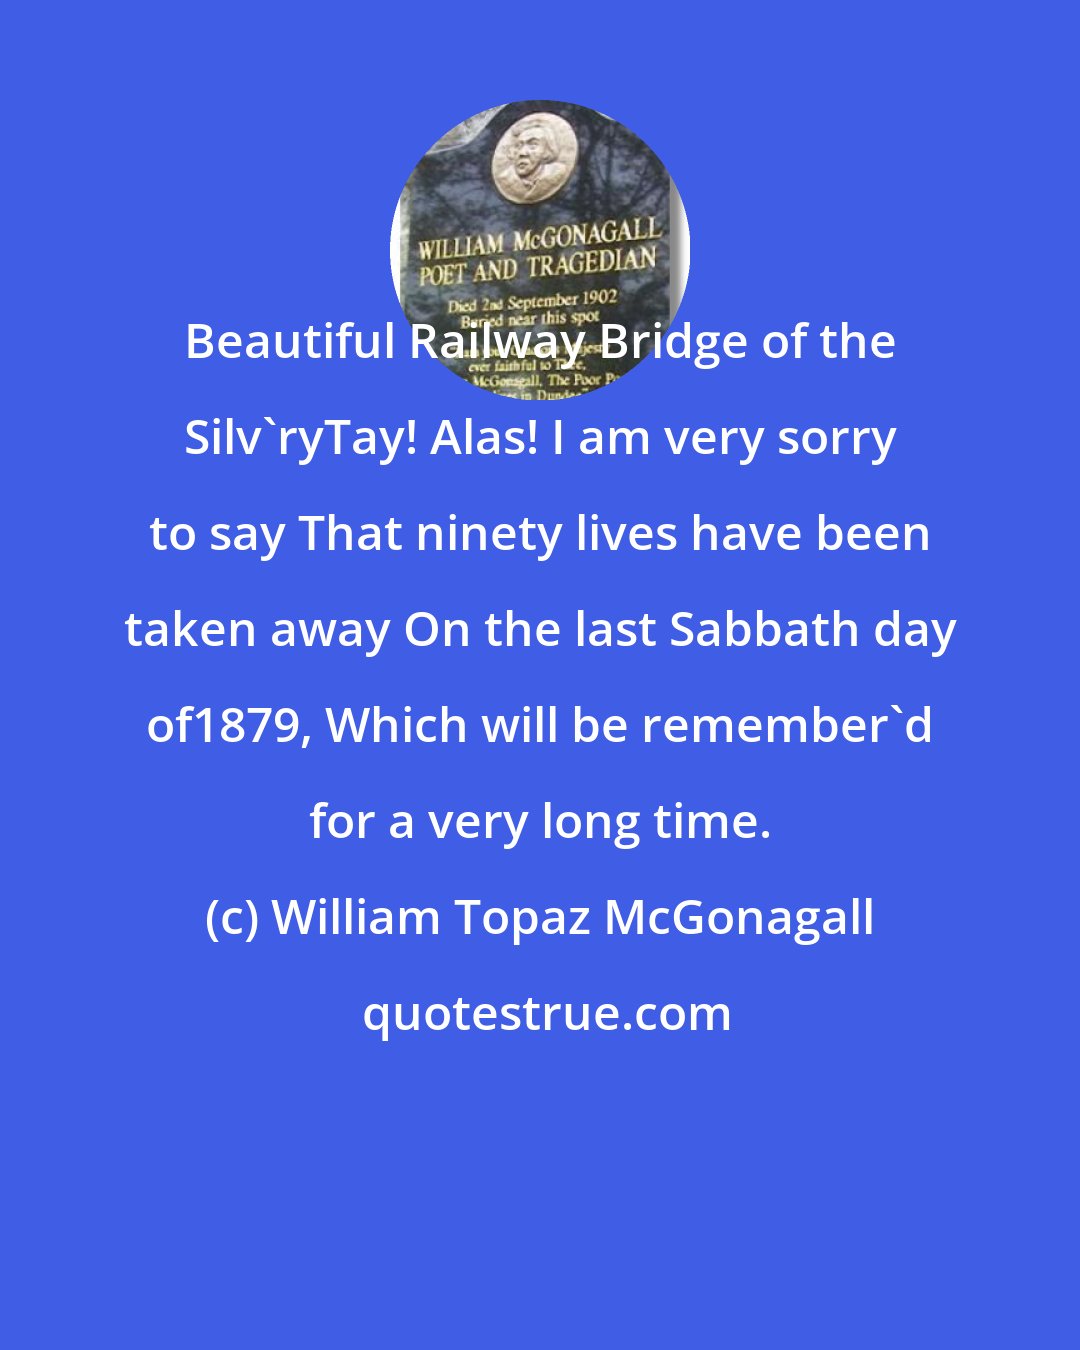 William Topaz McGonagall: Beautiful Railway Bridge of the Silv'ryTay! Alas! I am very sorry to say That ninety lives have been taken away On the last Sabbath day of1879, Which will be remember'd for a very long time.